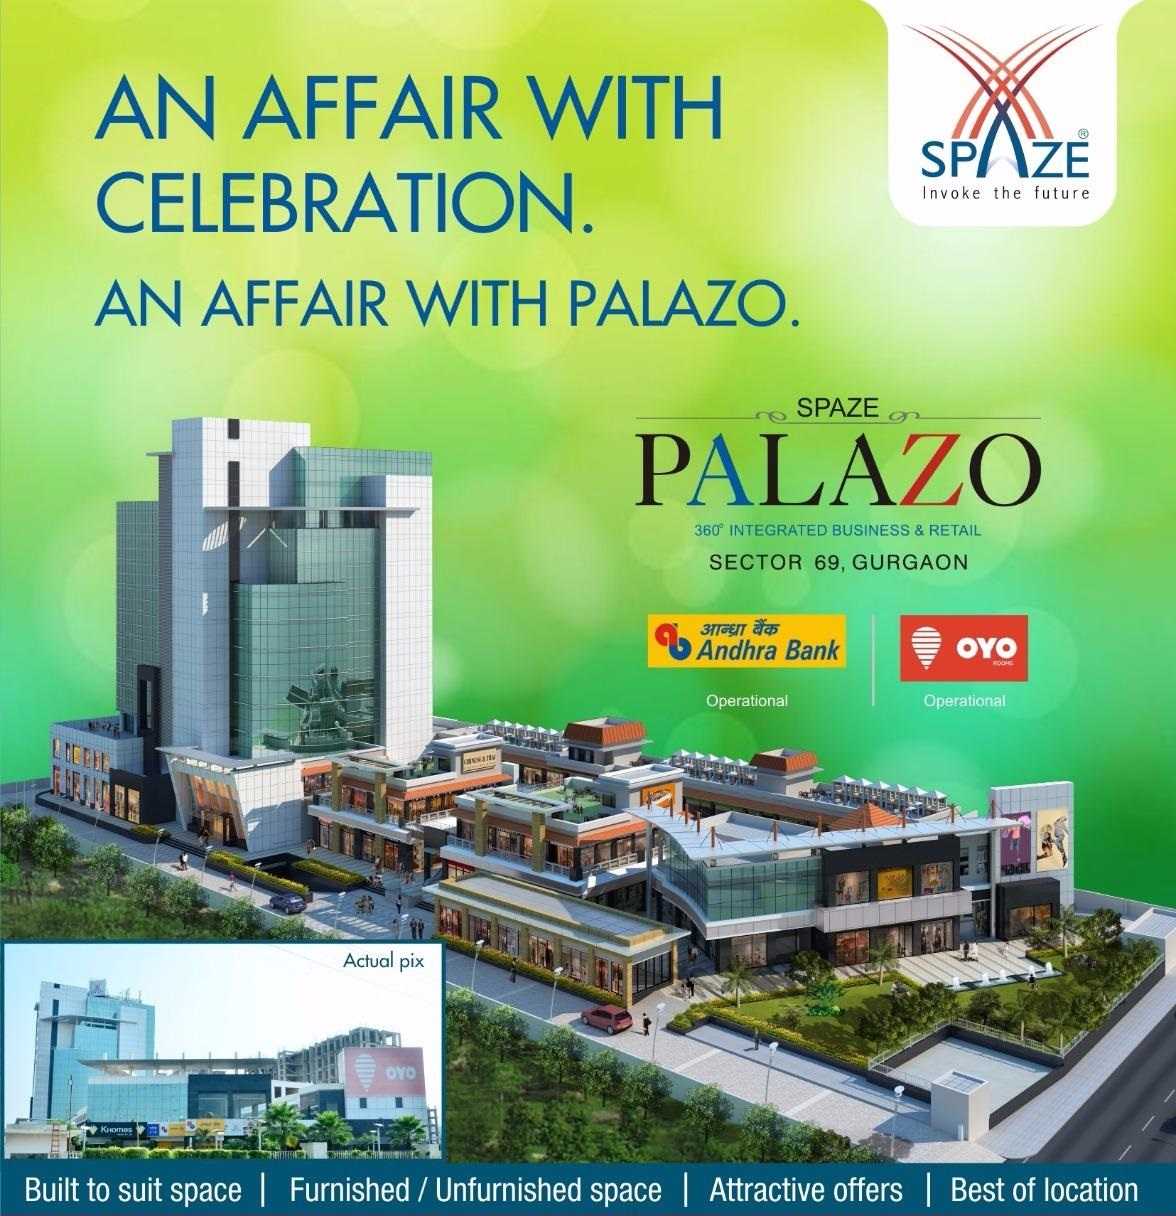 Spaze Palazo - 360 degree integrated business & retail space in Gurgaon Update